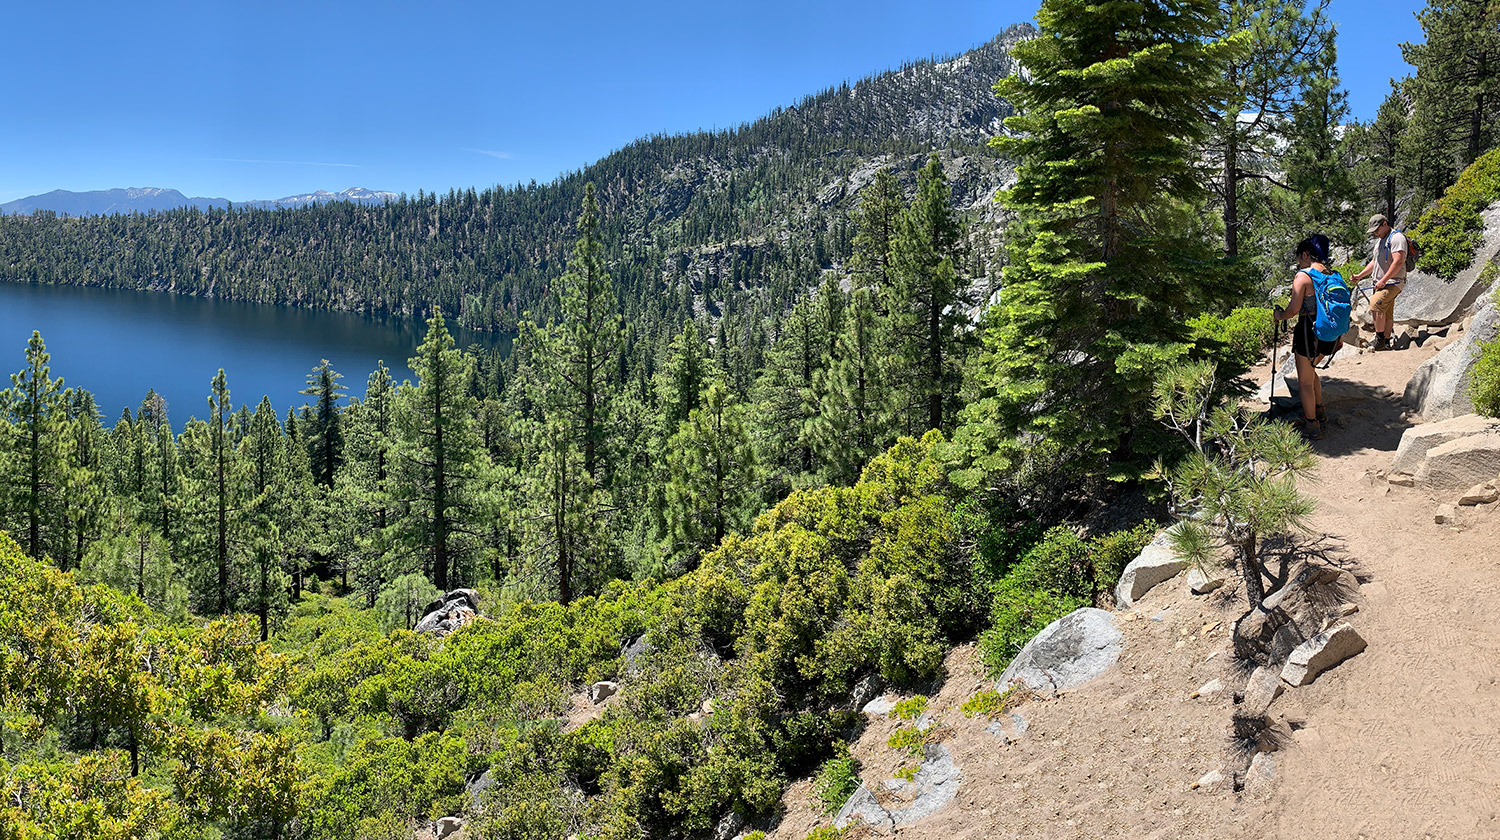 Students from CSUDH's Tree-Ring Lab do field work in the South Lake Tahoe area in June, 2019.